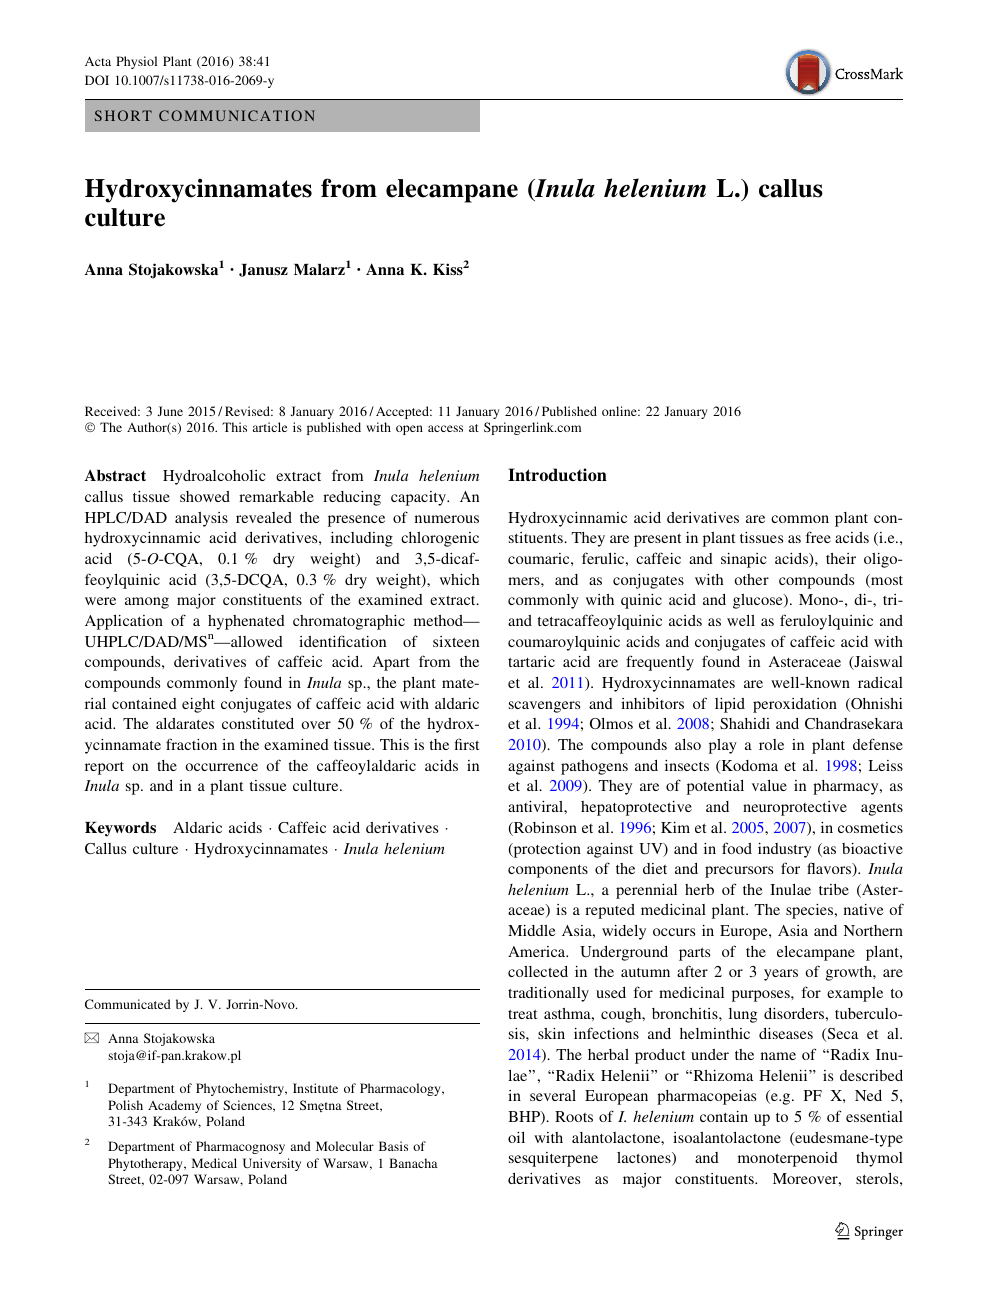 Hydroxycinnamates From Elecampane Inula Helenium L Callus Culture Topic Of Research Paper In Chemical Sciences Download Scholarly Article Pdf And Read For Free On Cyberleninka Open Science Hub